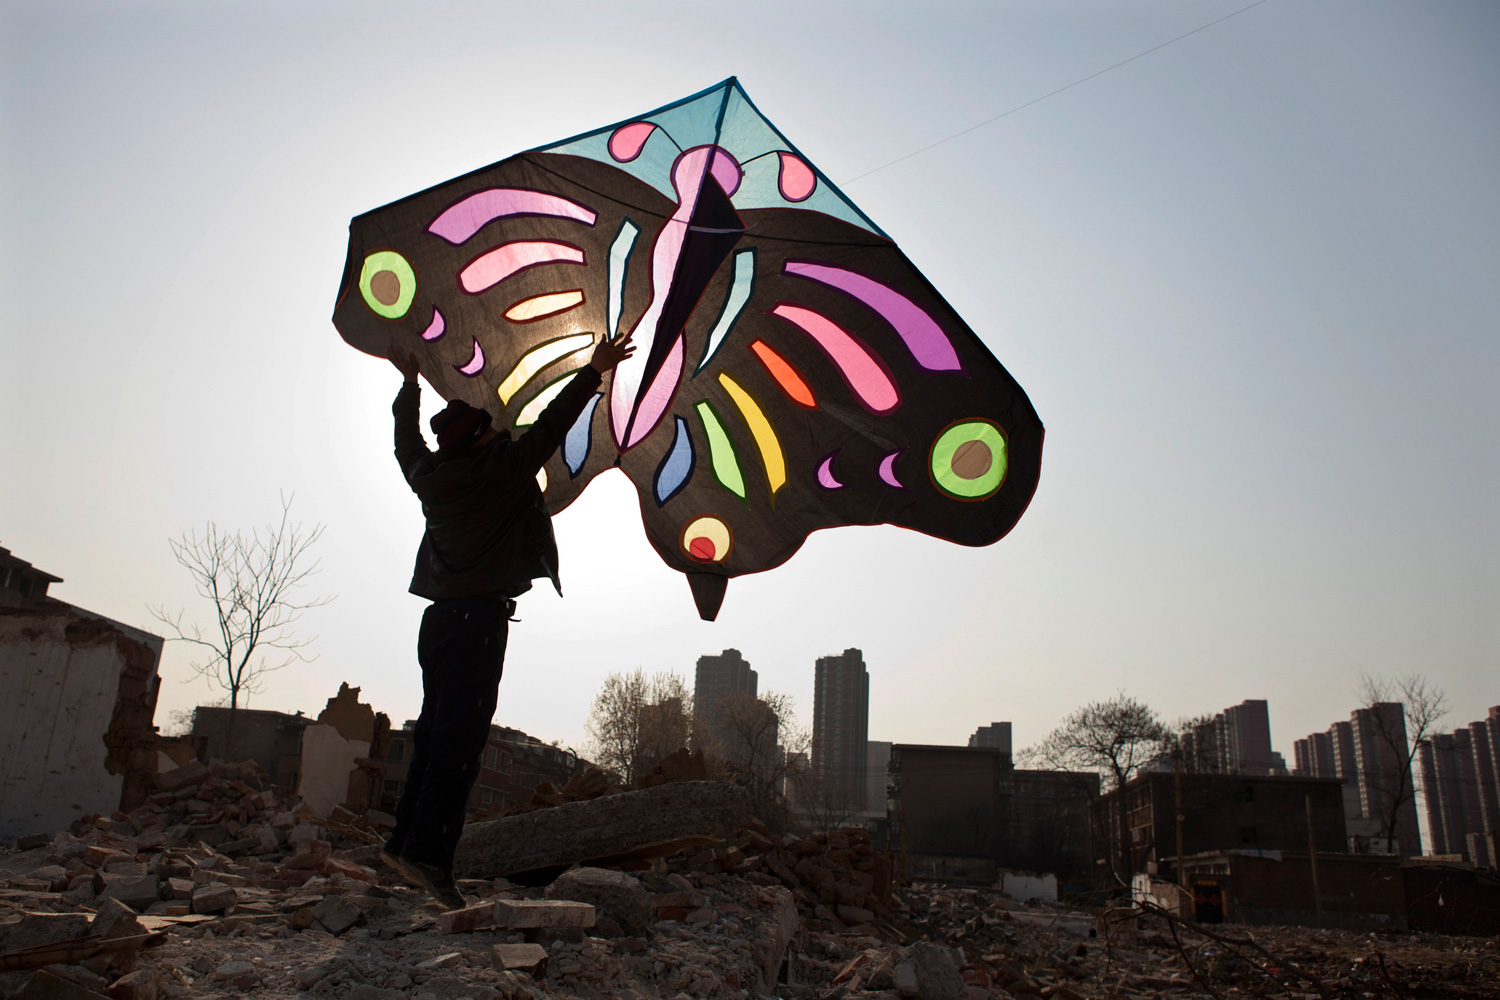 March 24, 2012. A man holds up a kite as he helps to fly it at a demolition site near residential areas in Shijiazhuang, Hebei province, China.